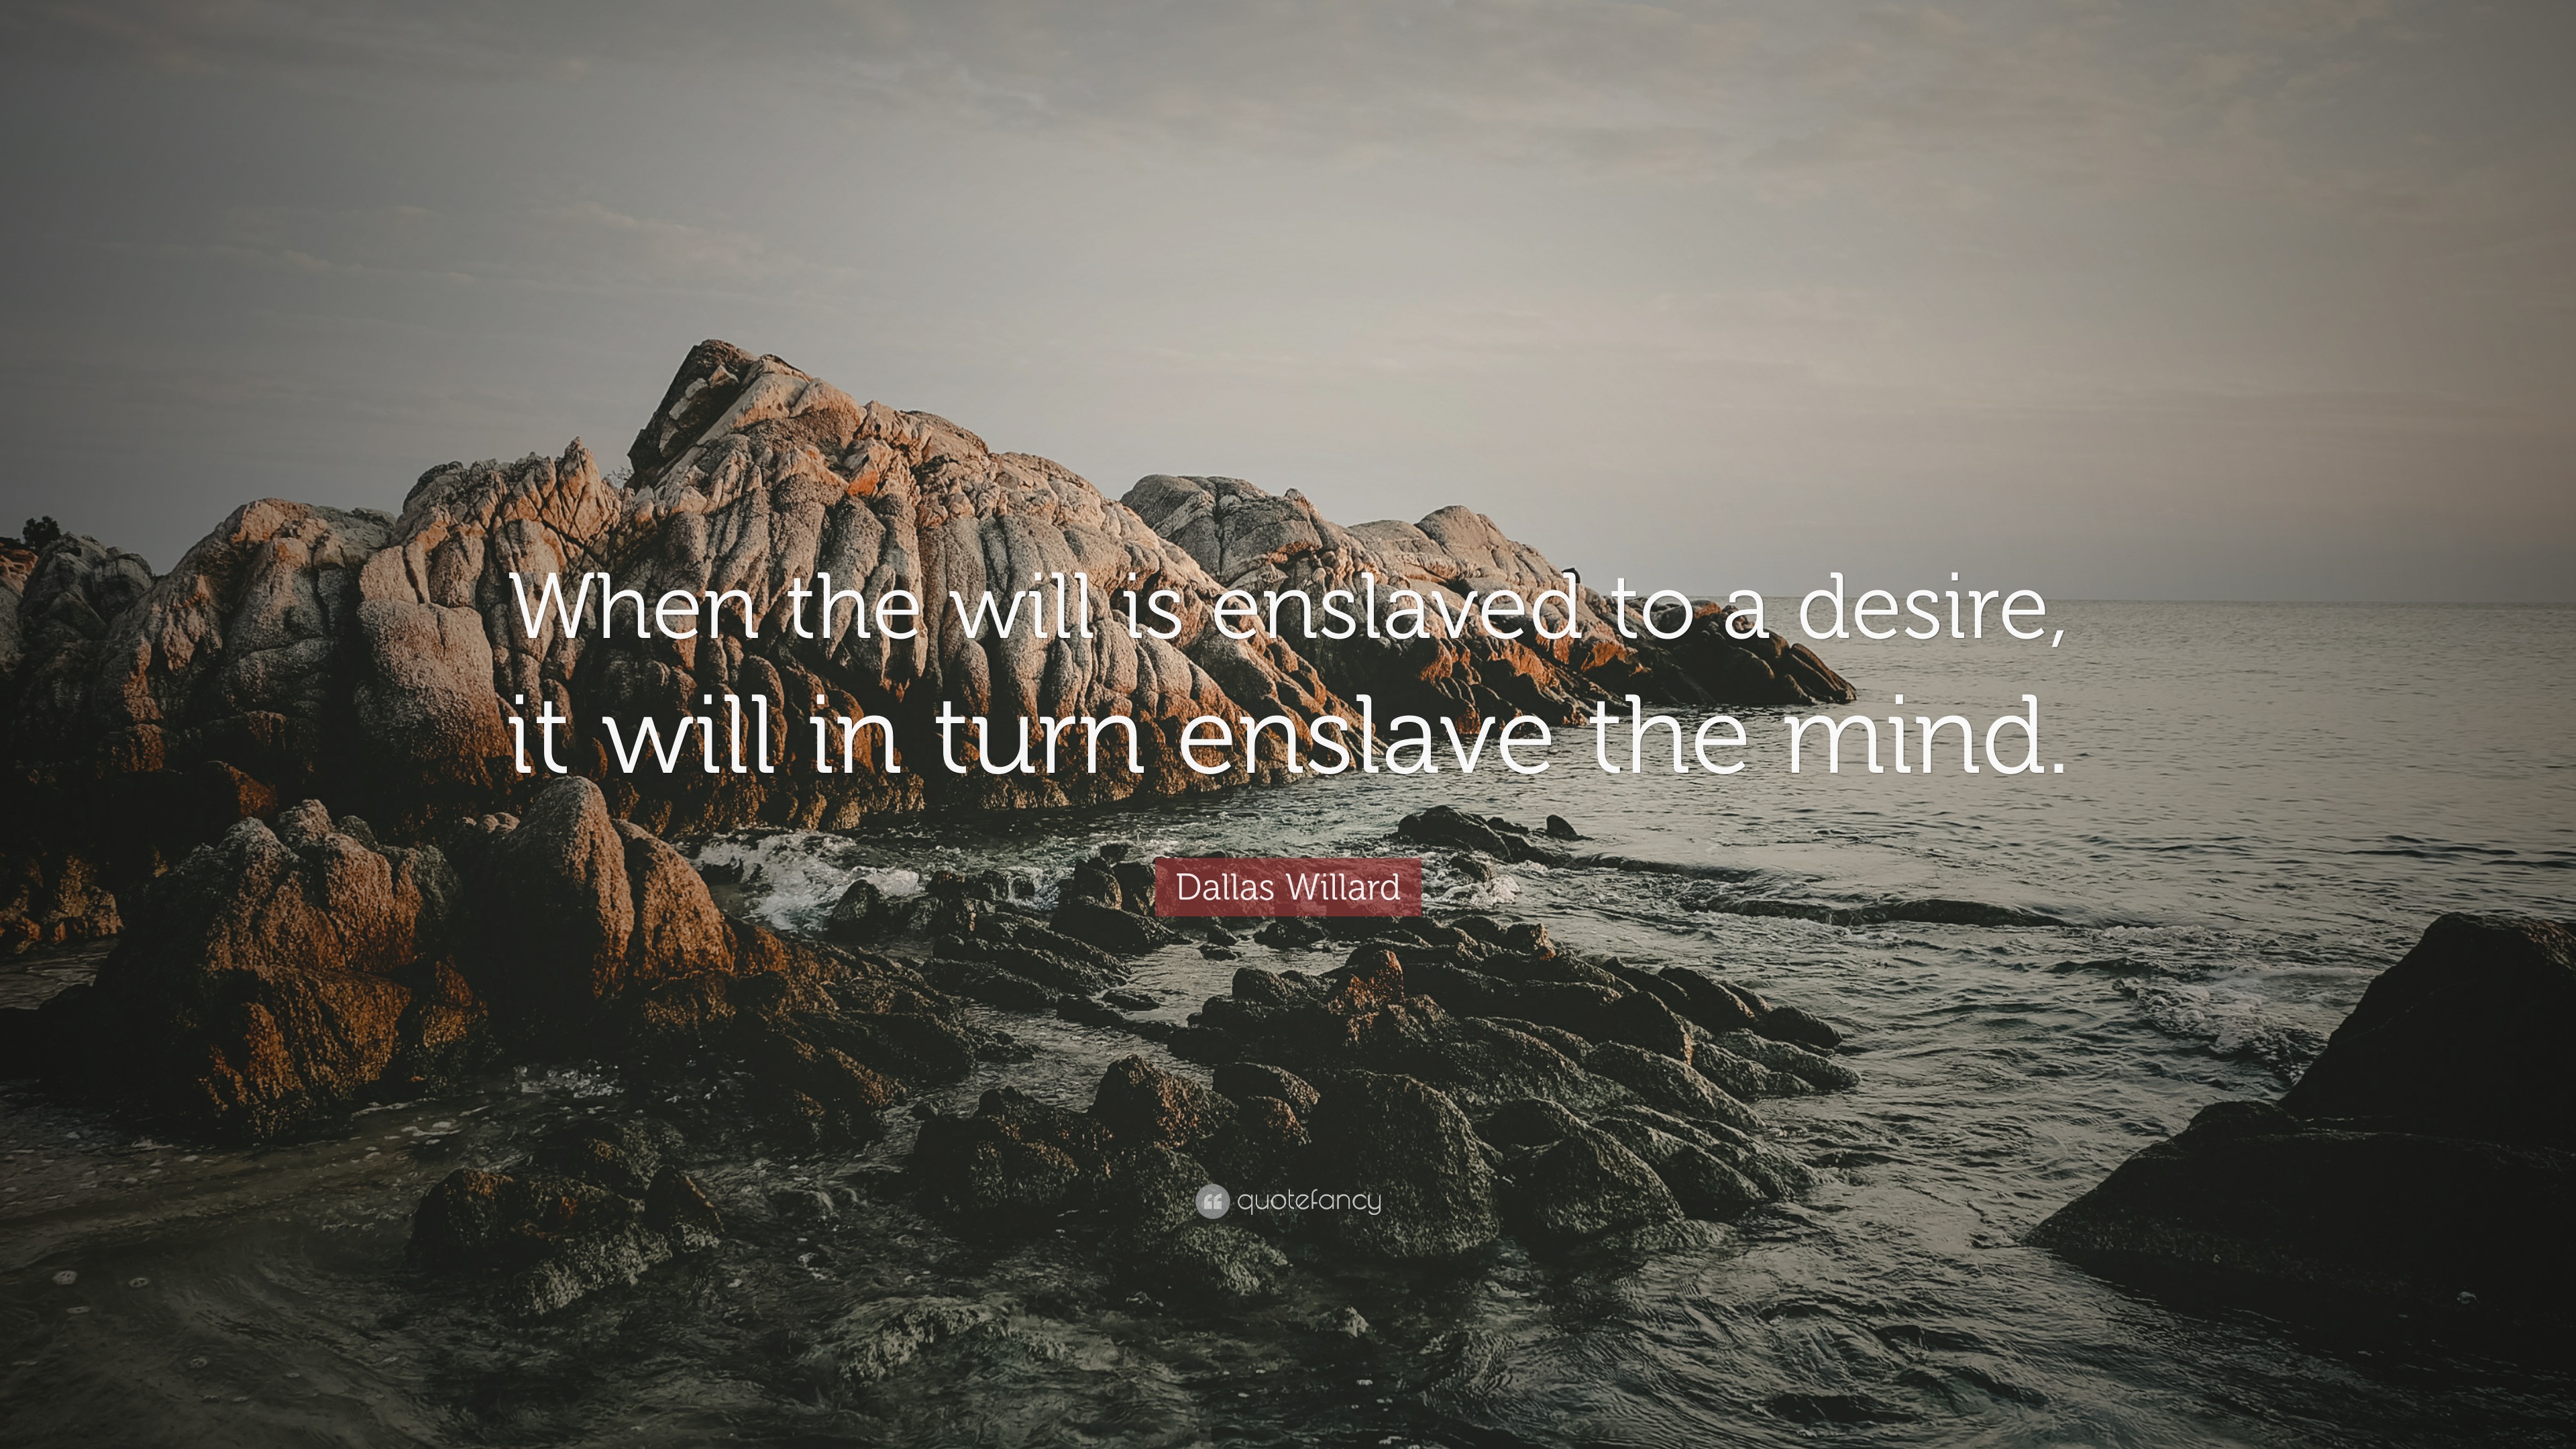 Dallas Willard Quote: “When the will is enslaved to a desire, it will ...